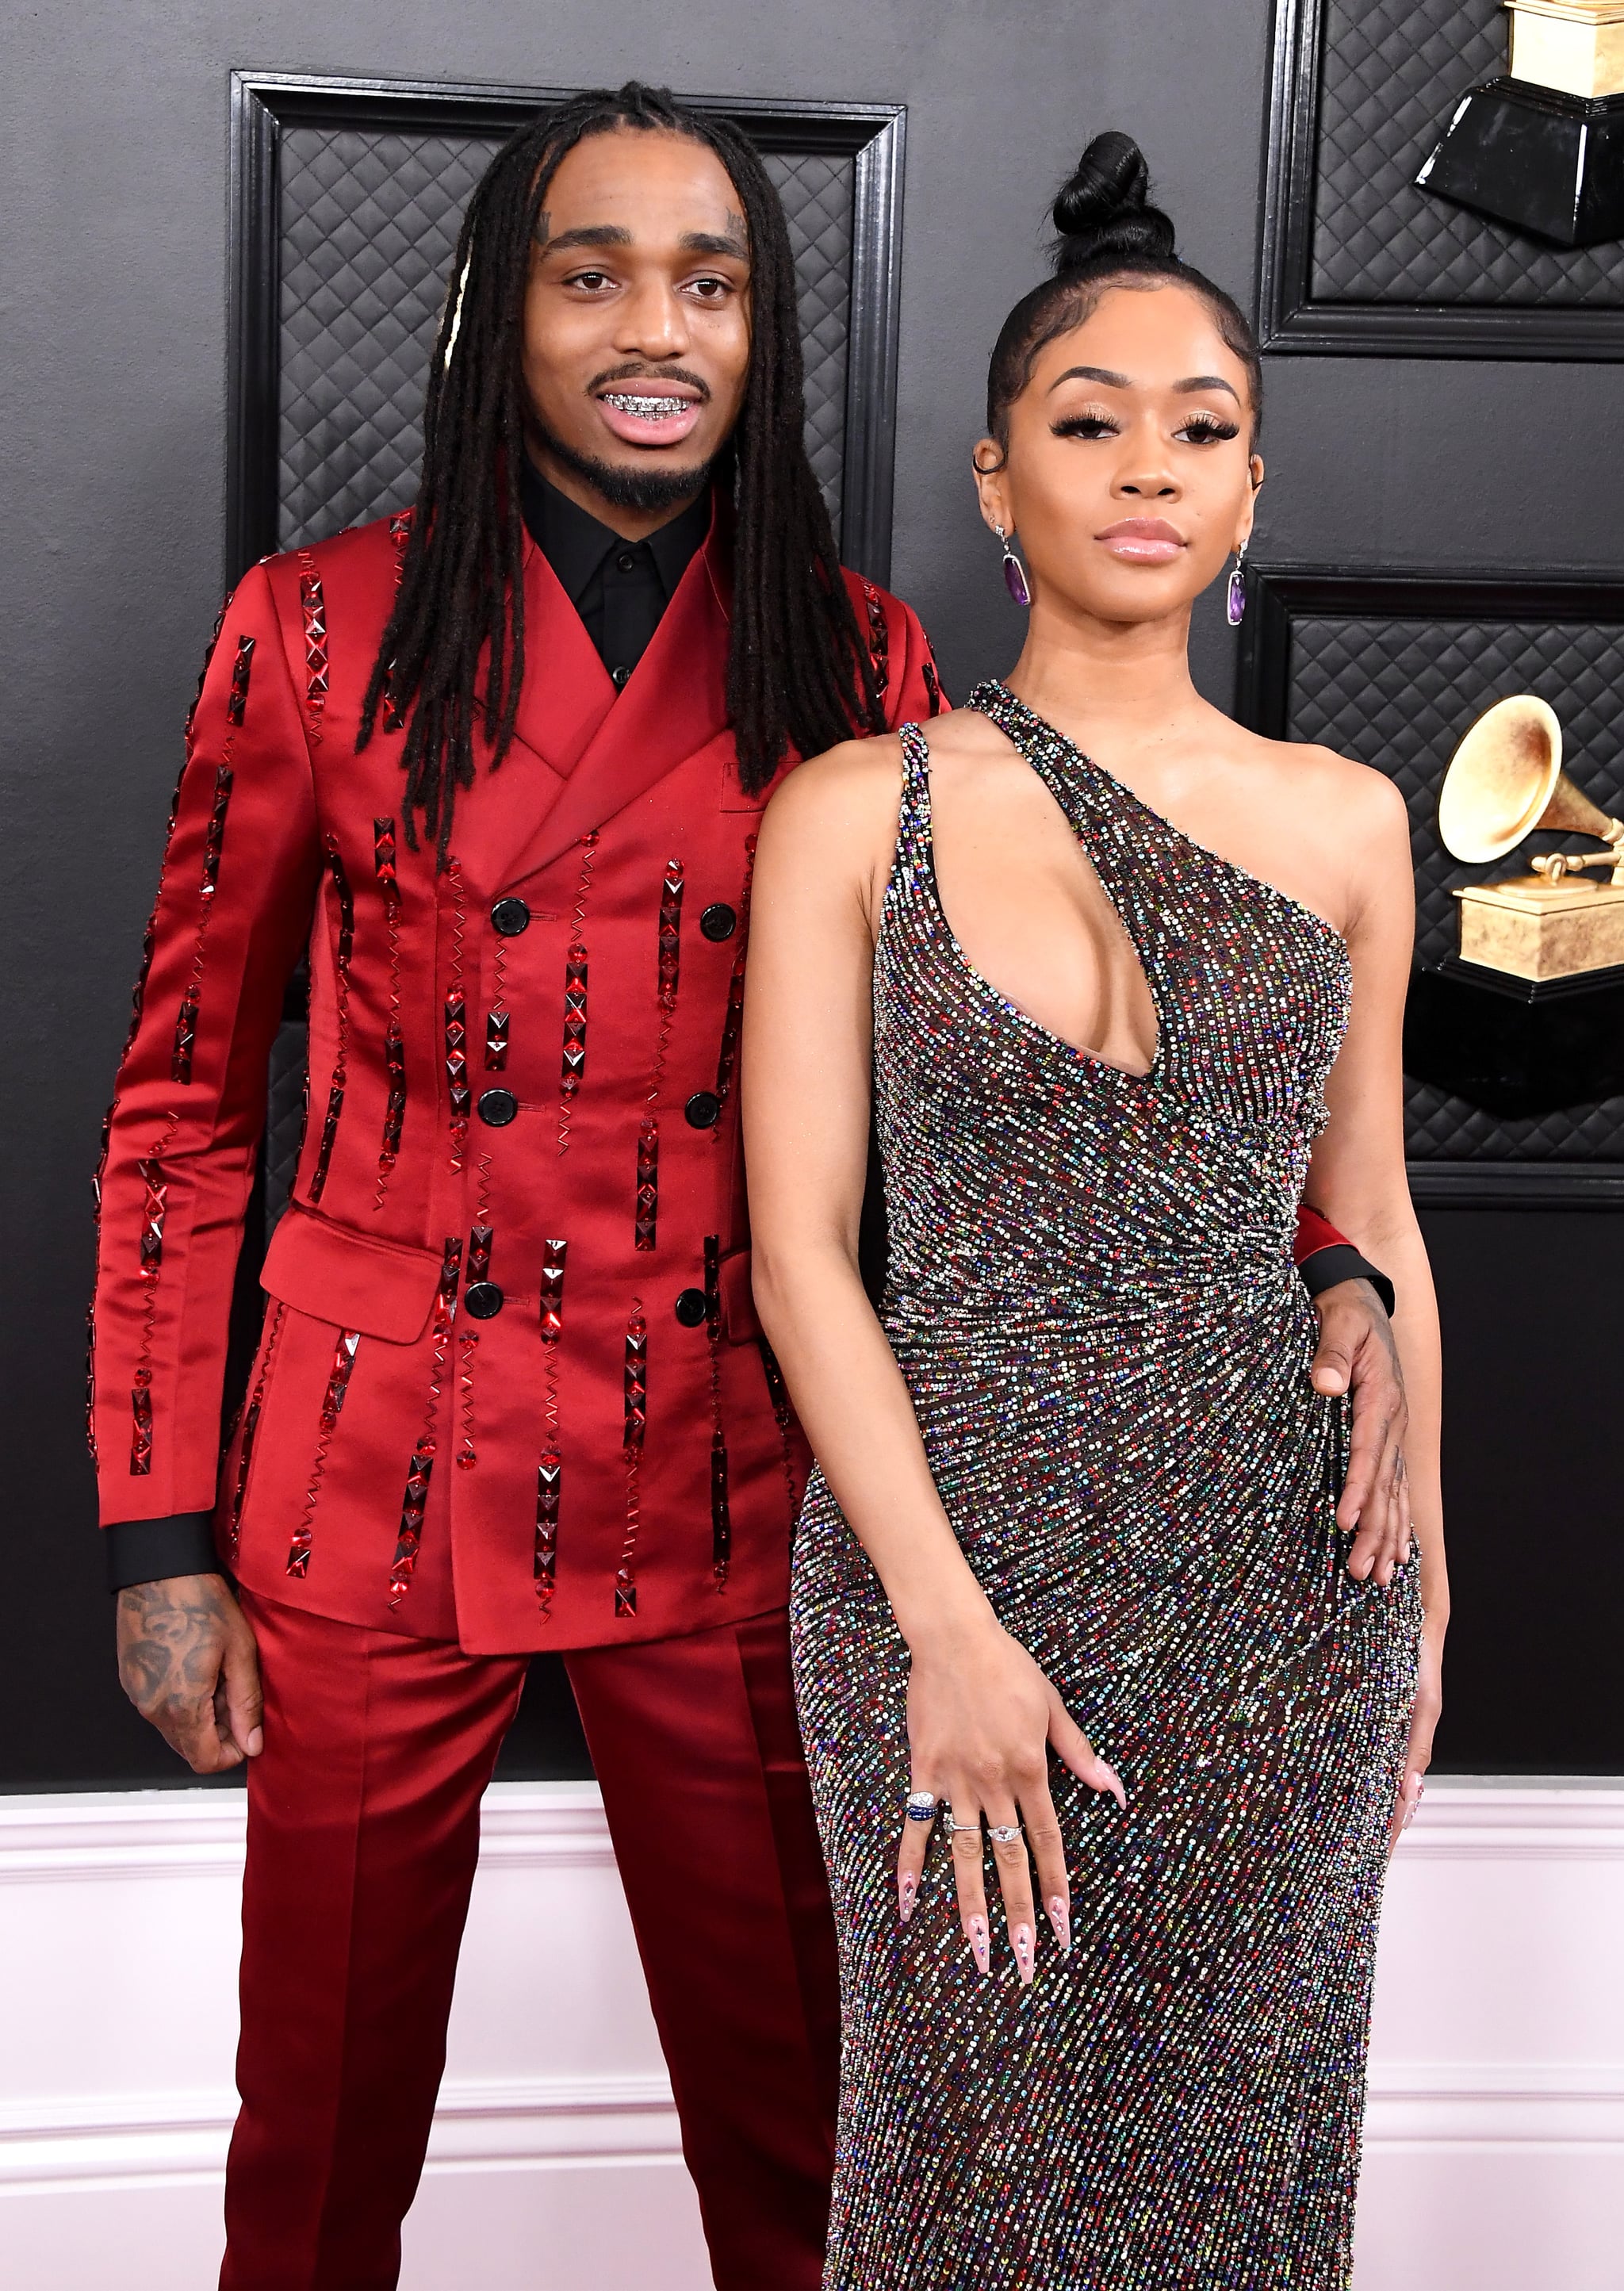 LOS ANGELES, CALIFORNIA - JANUARY 26: (L-R) Quavo and Saweetie attend the 62nd Annual GRAMMY Awards at Staples Centre on January 26, 2020 in Los Angeles, California. (Photo by Steve Granitz/WireImage)